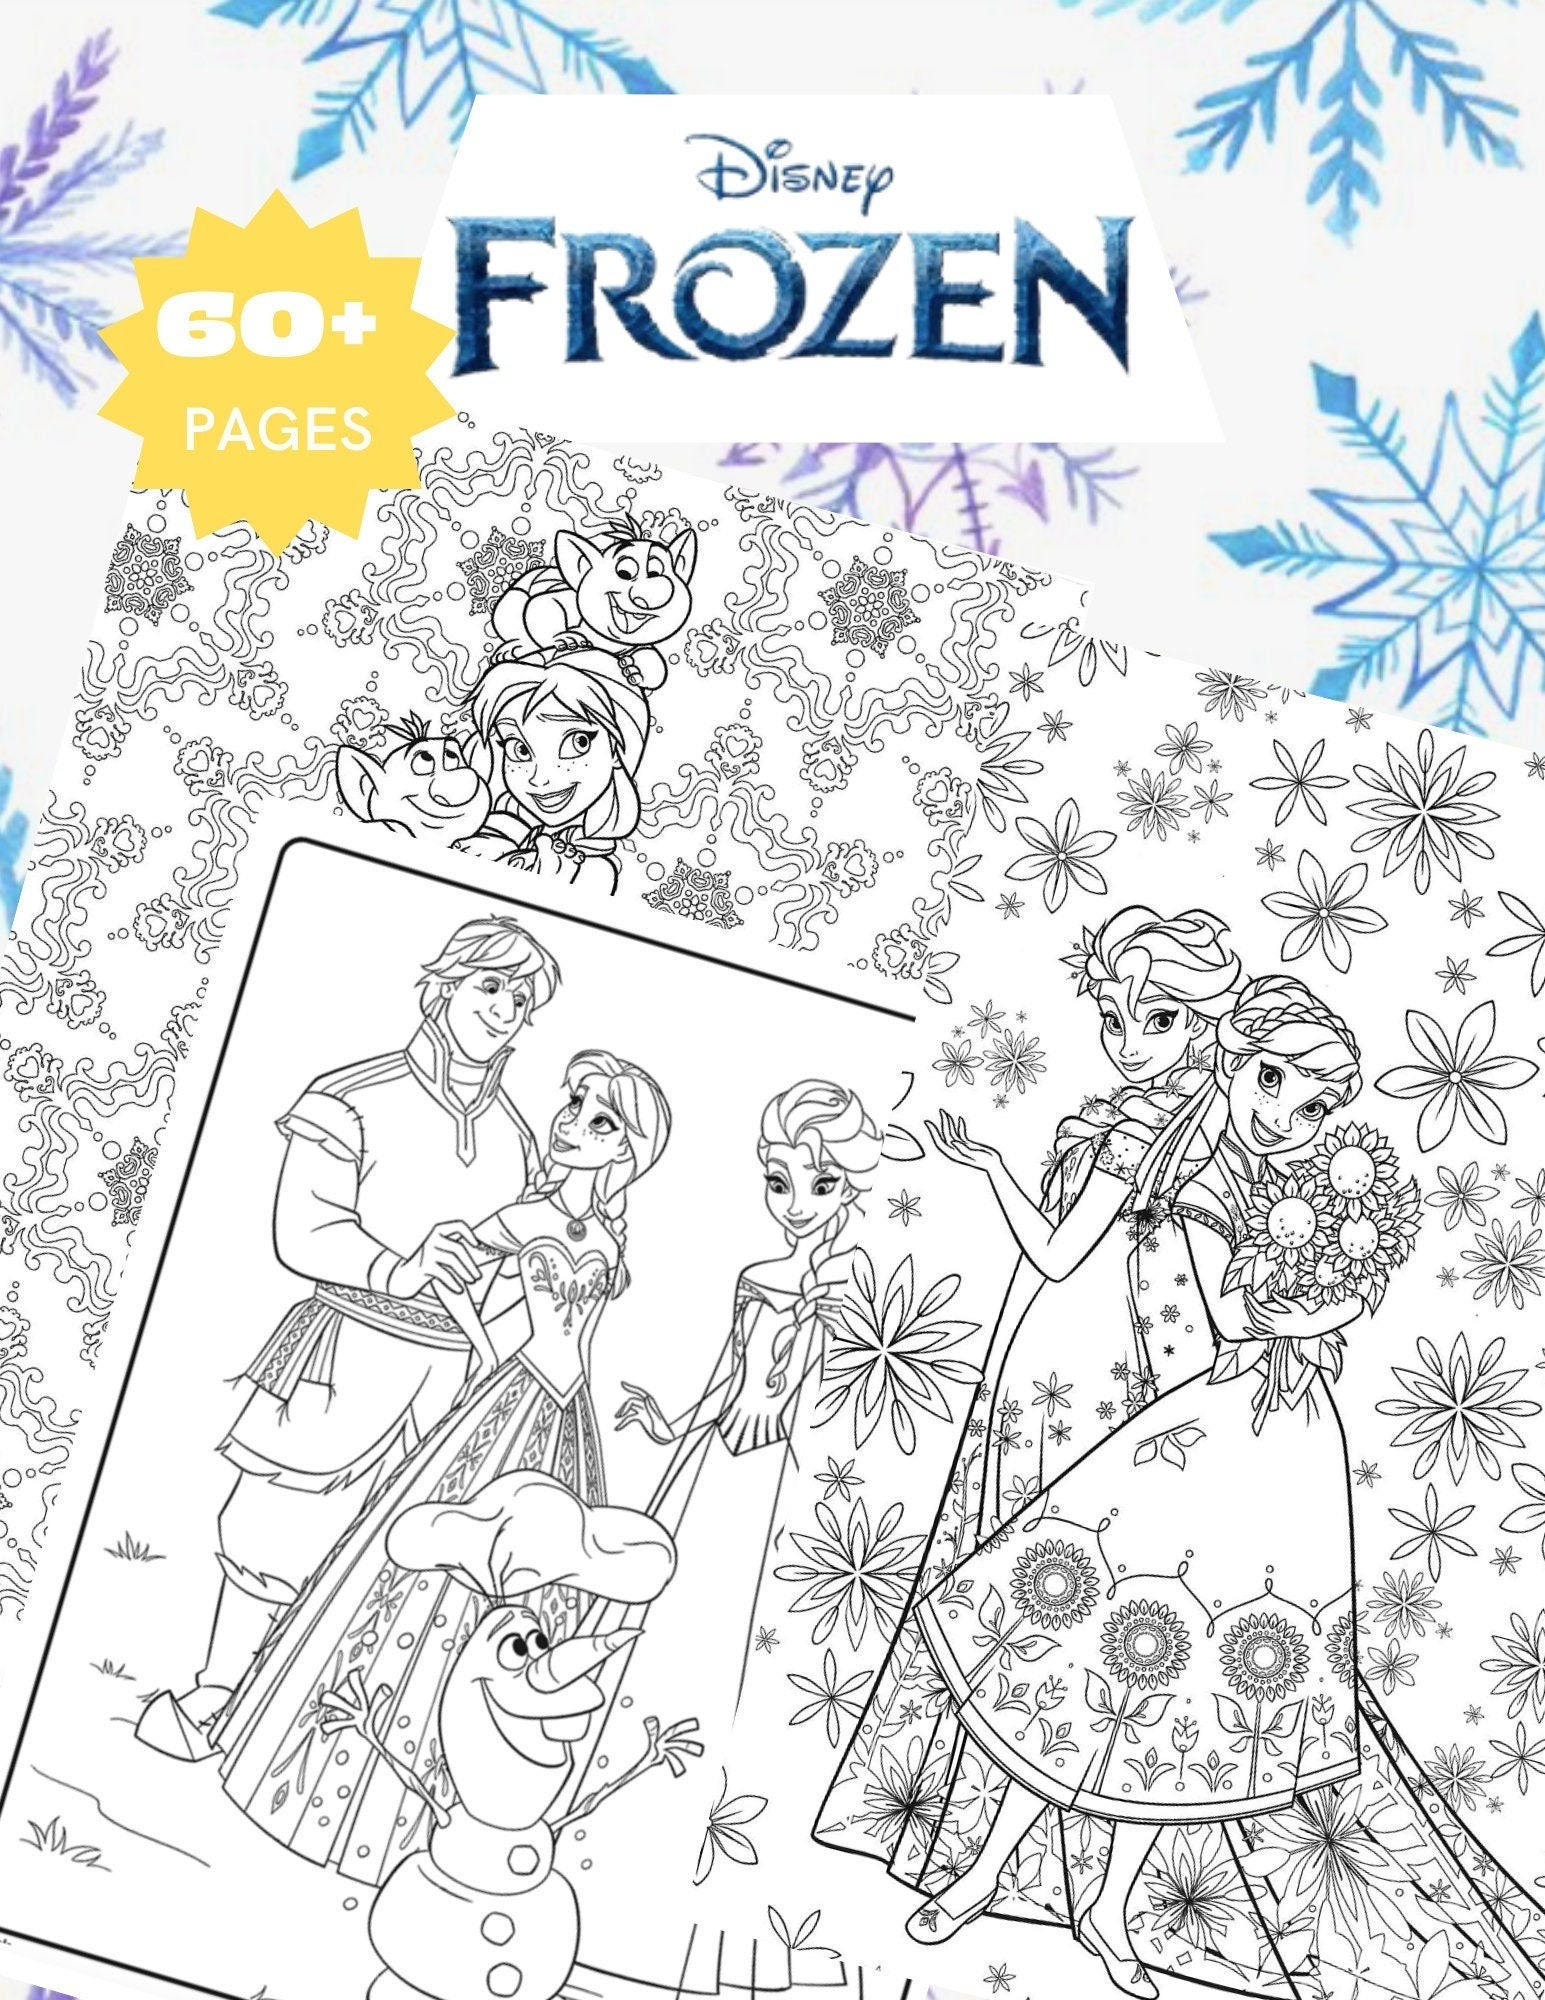 21 Frozen Coloring Pages, Frozen Elsa Coloring Book, Birthday Party Favor  Activity, Printable Frozen Coloring Book, Best Gift for Girls 